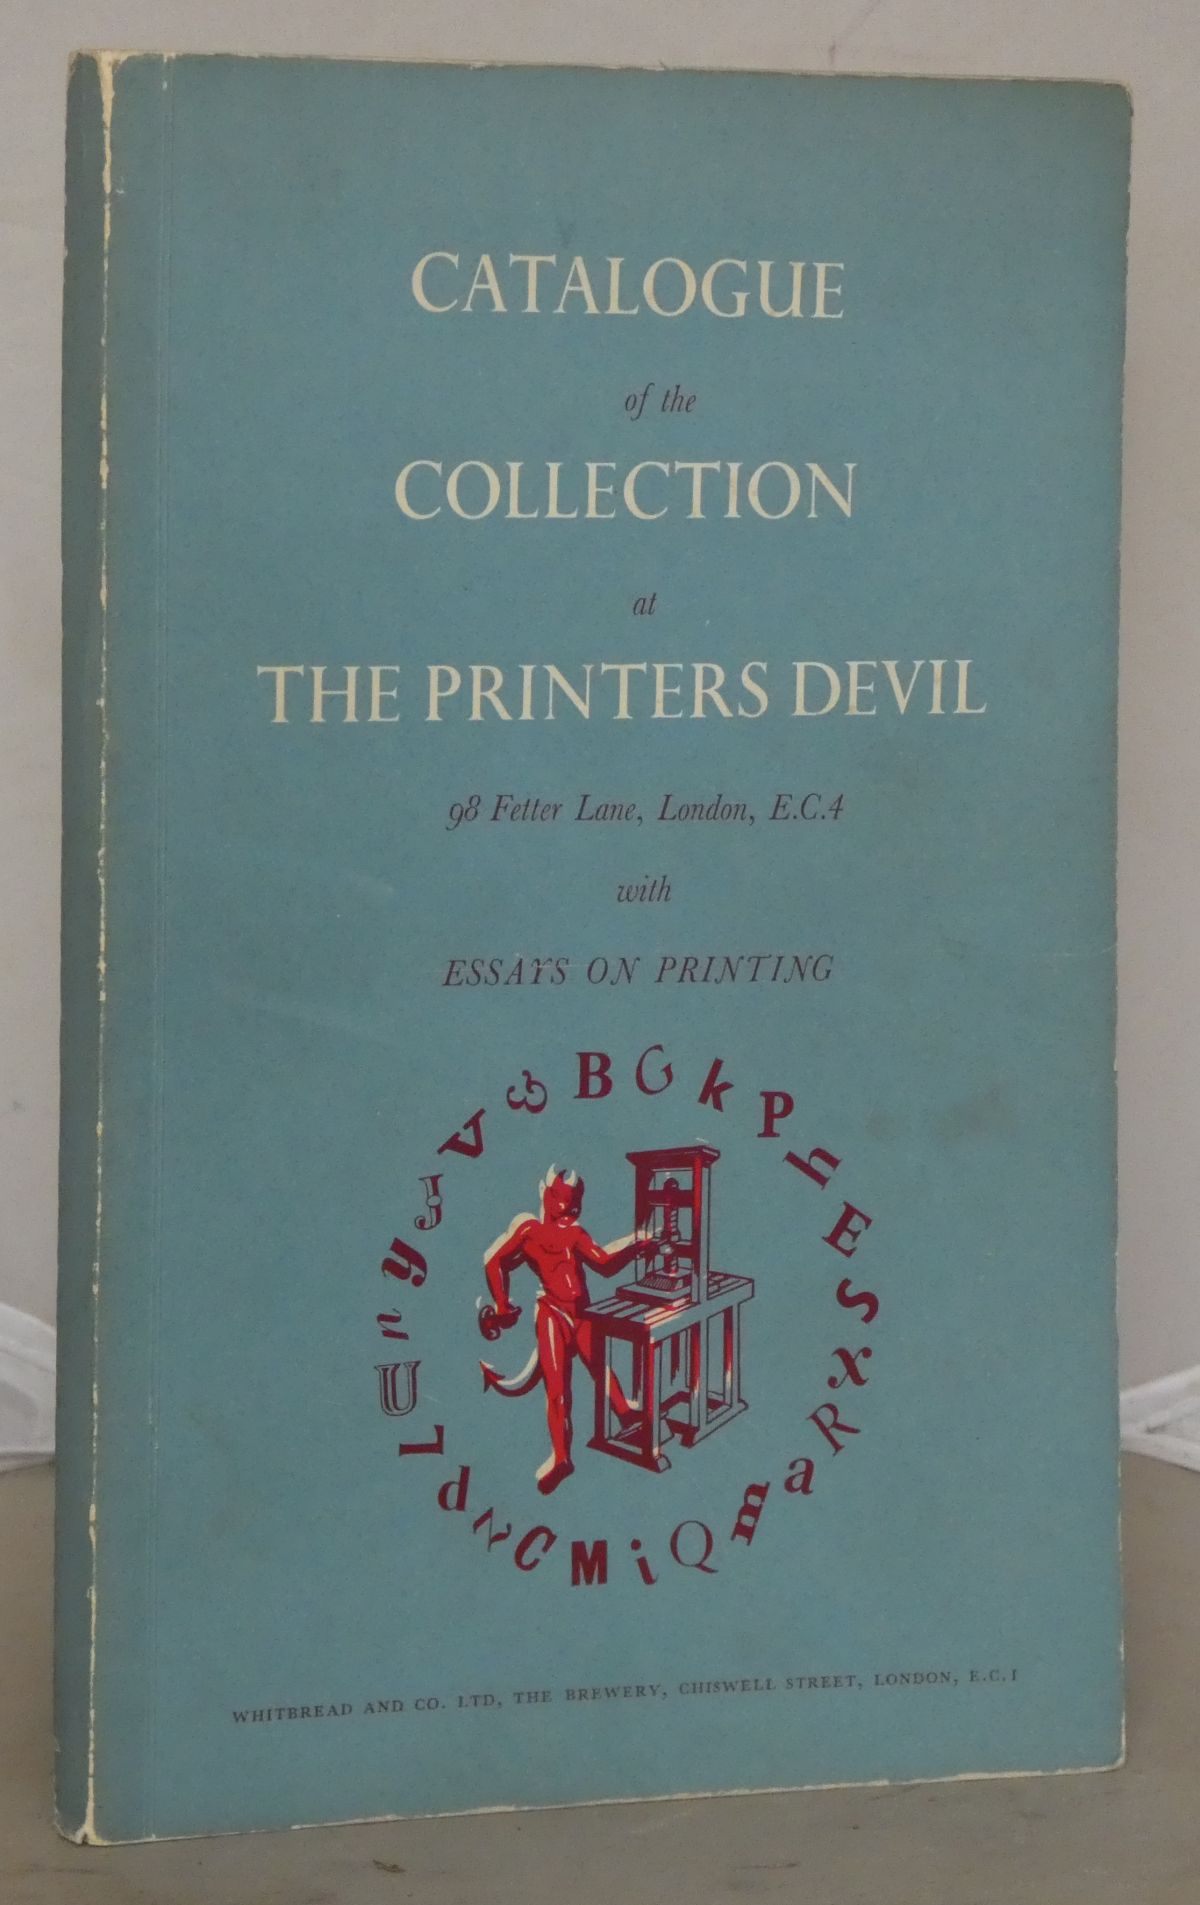 Image for Catalogue of the Collection of Items at the Printer's Devil, Fetter Lane, london, E.C.4: Illustrating the History of Printing with Essays and a Glossary of Terms